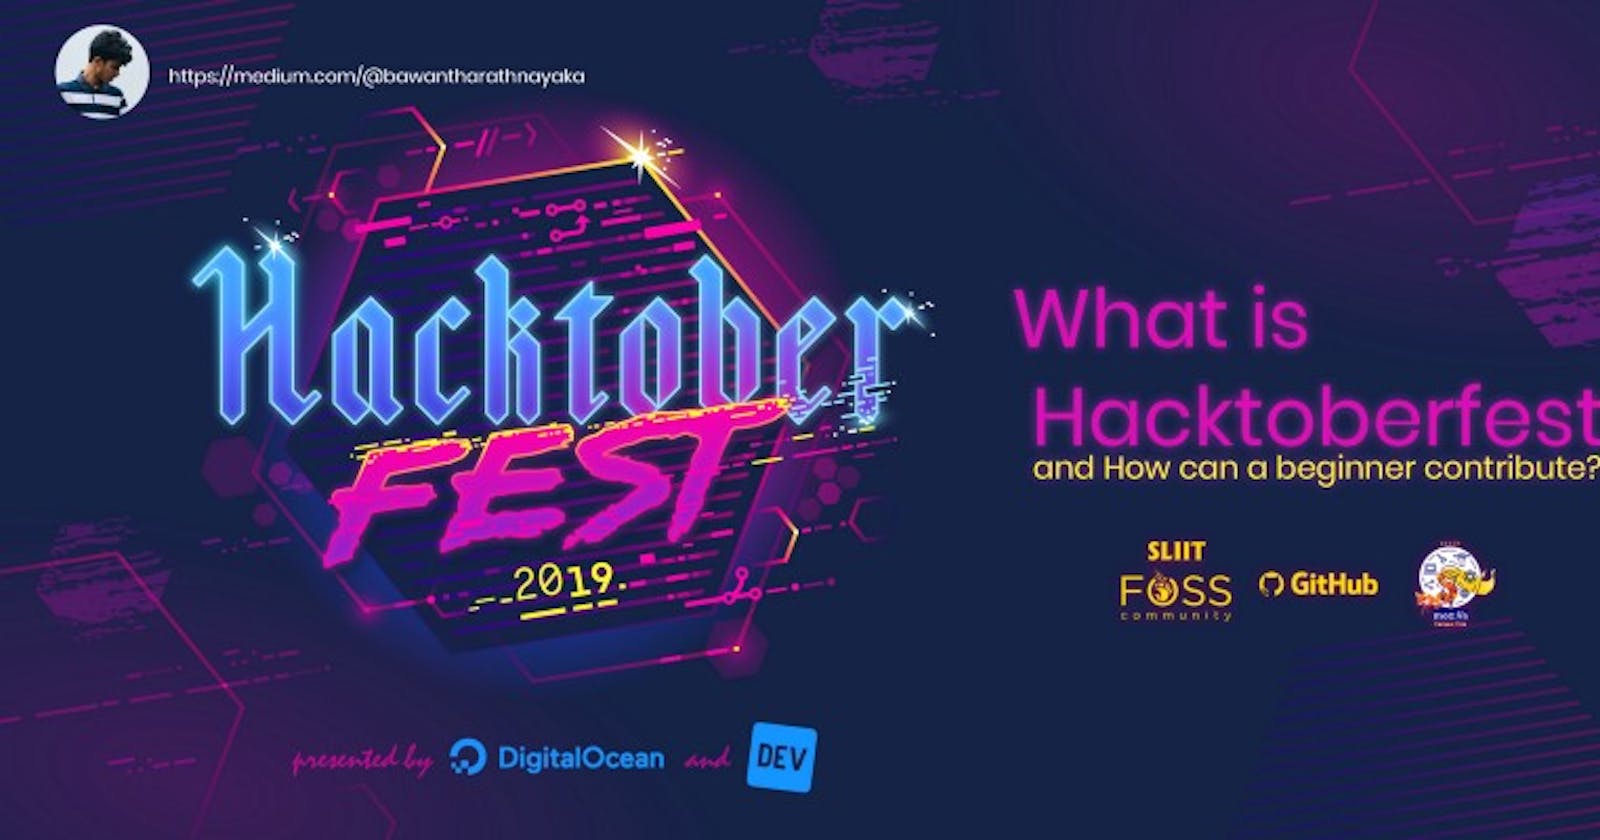 What is Hacktoberfest and How can a beginner contribute?